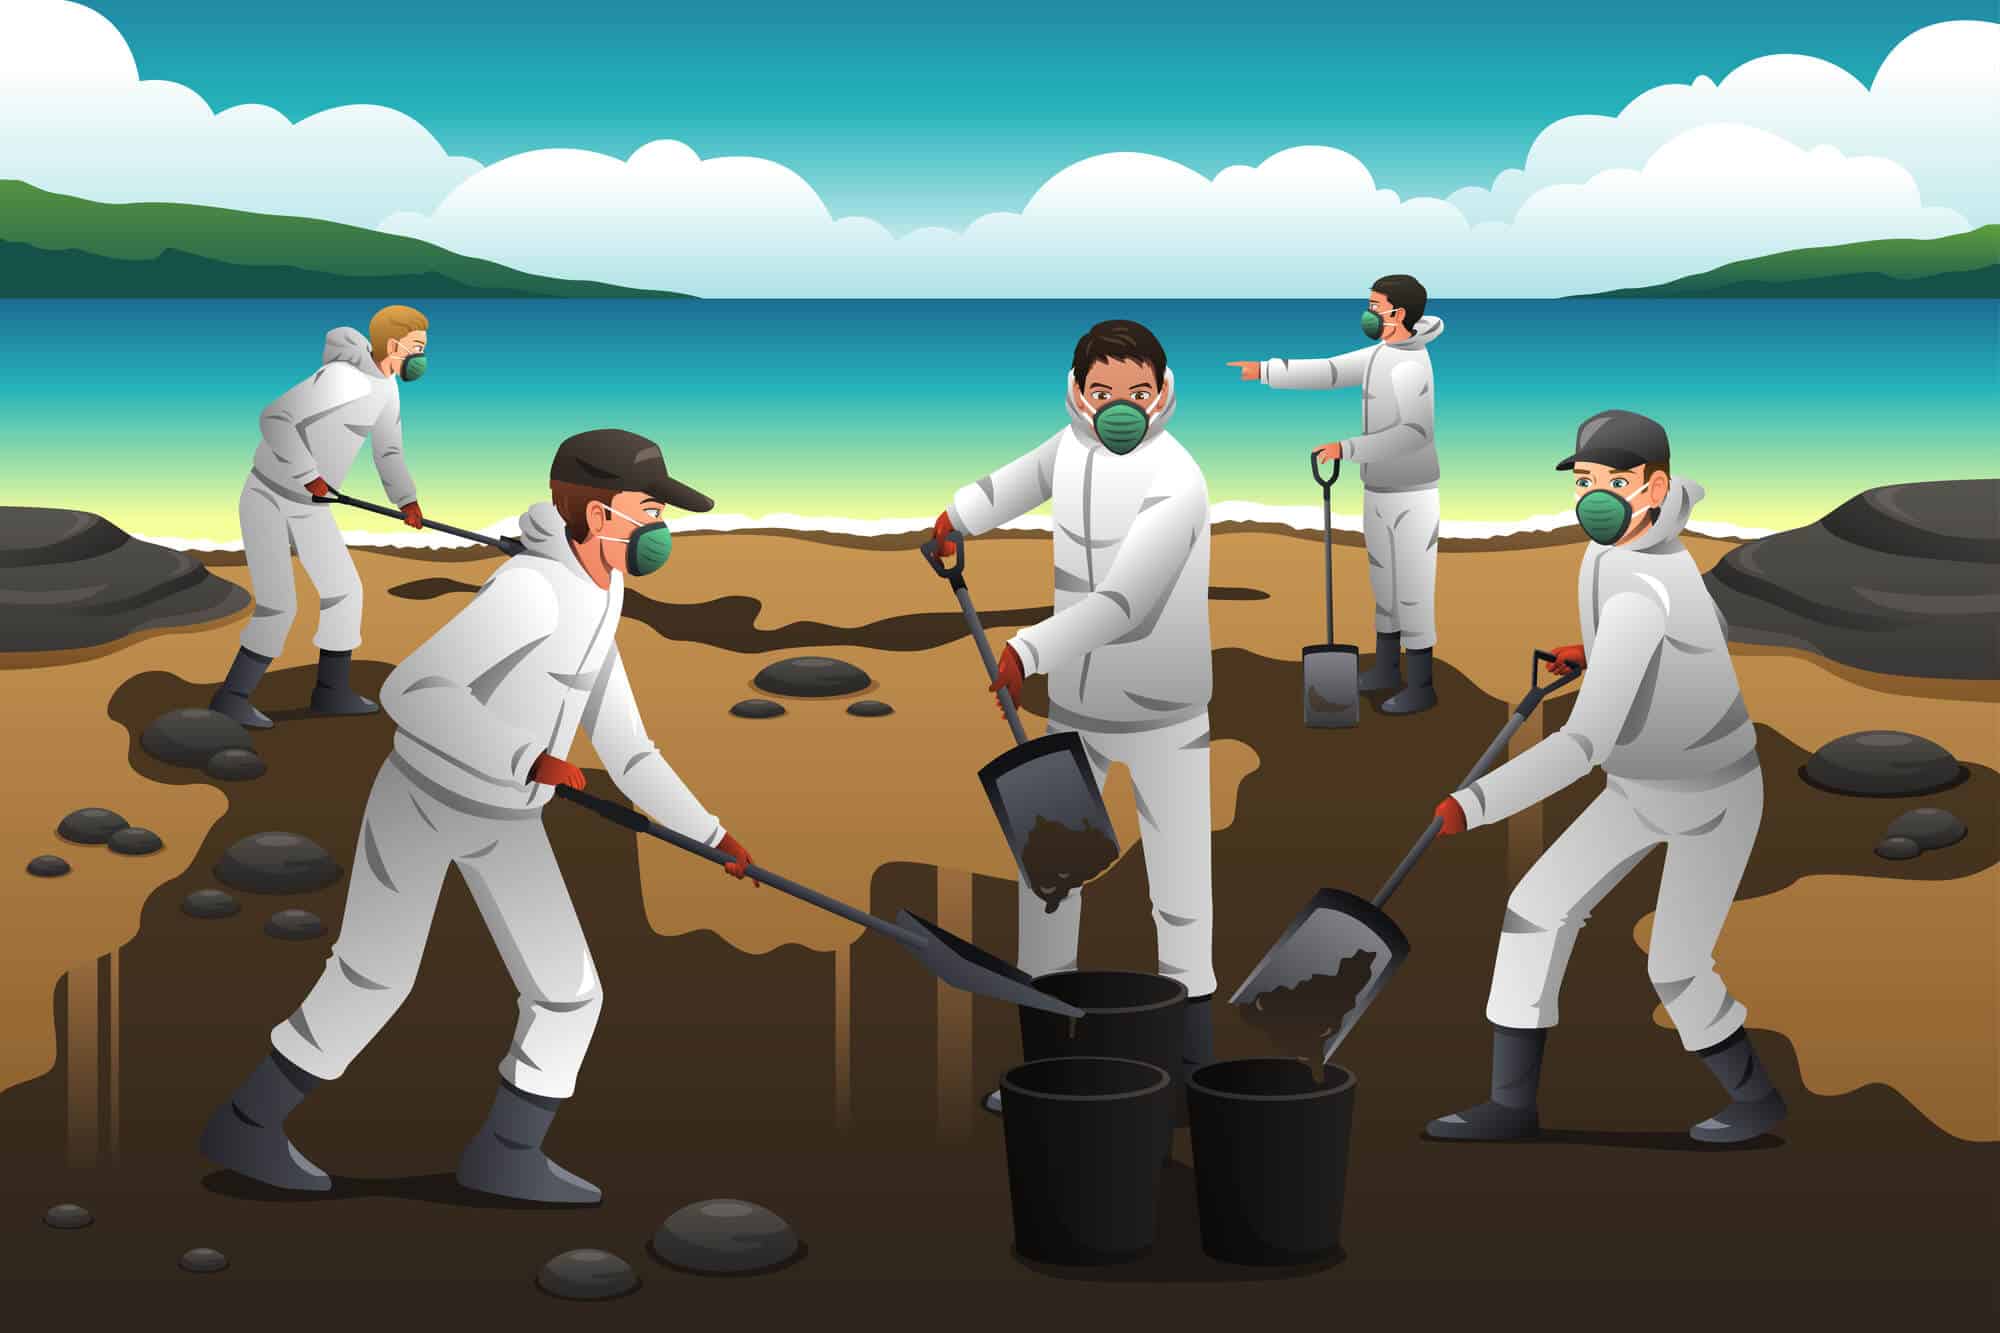 Cleaning up after an oil spill. Illustration: depositphotos.com